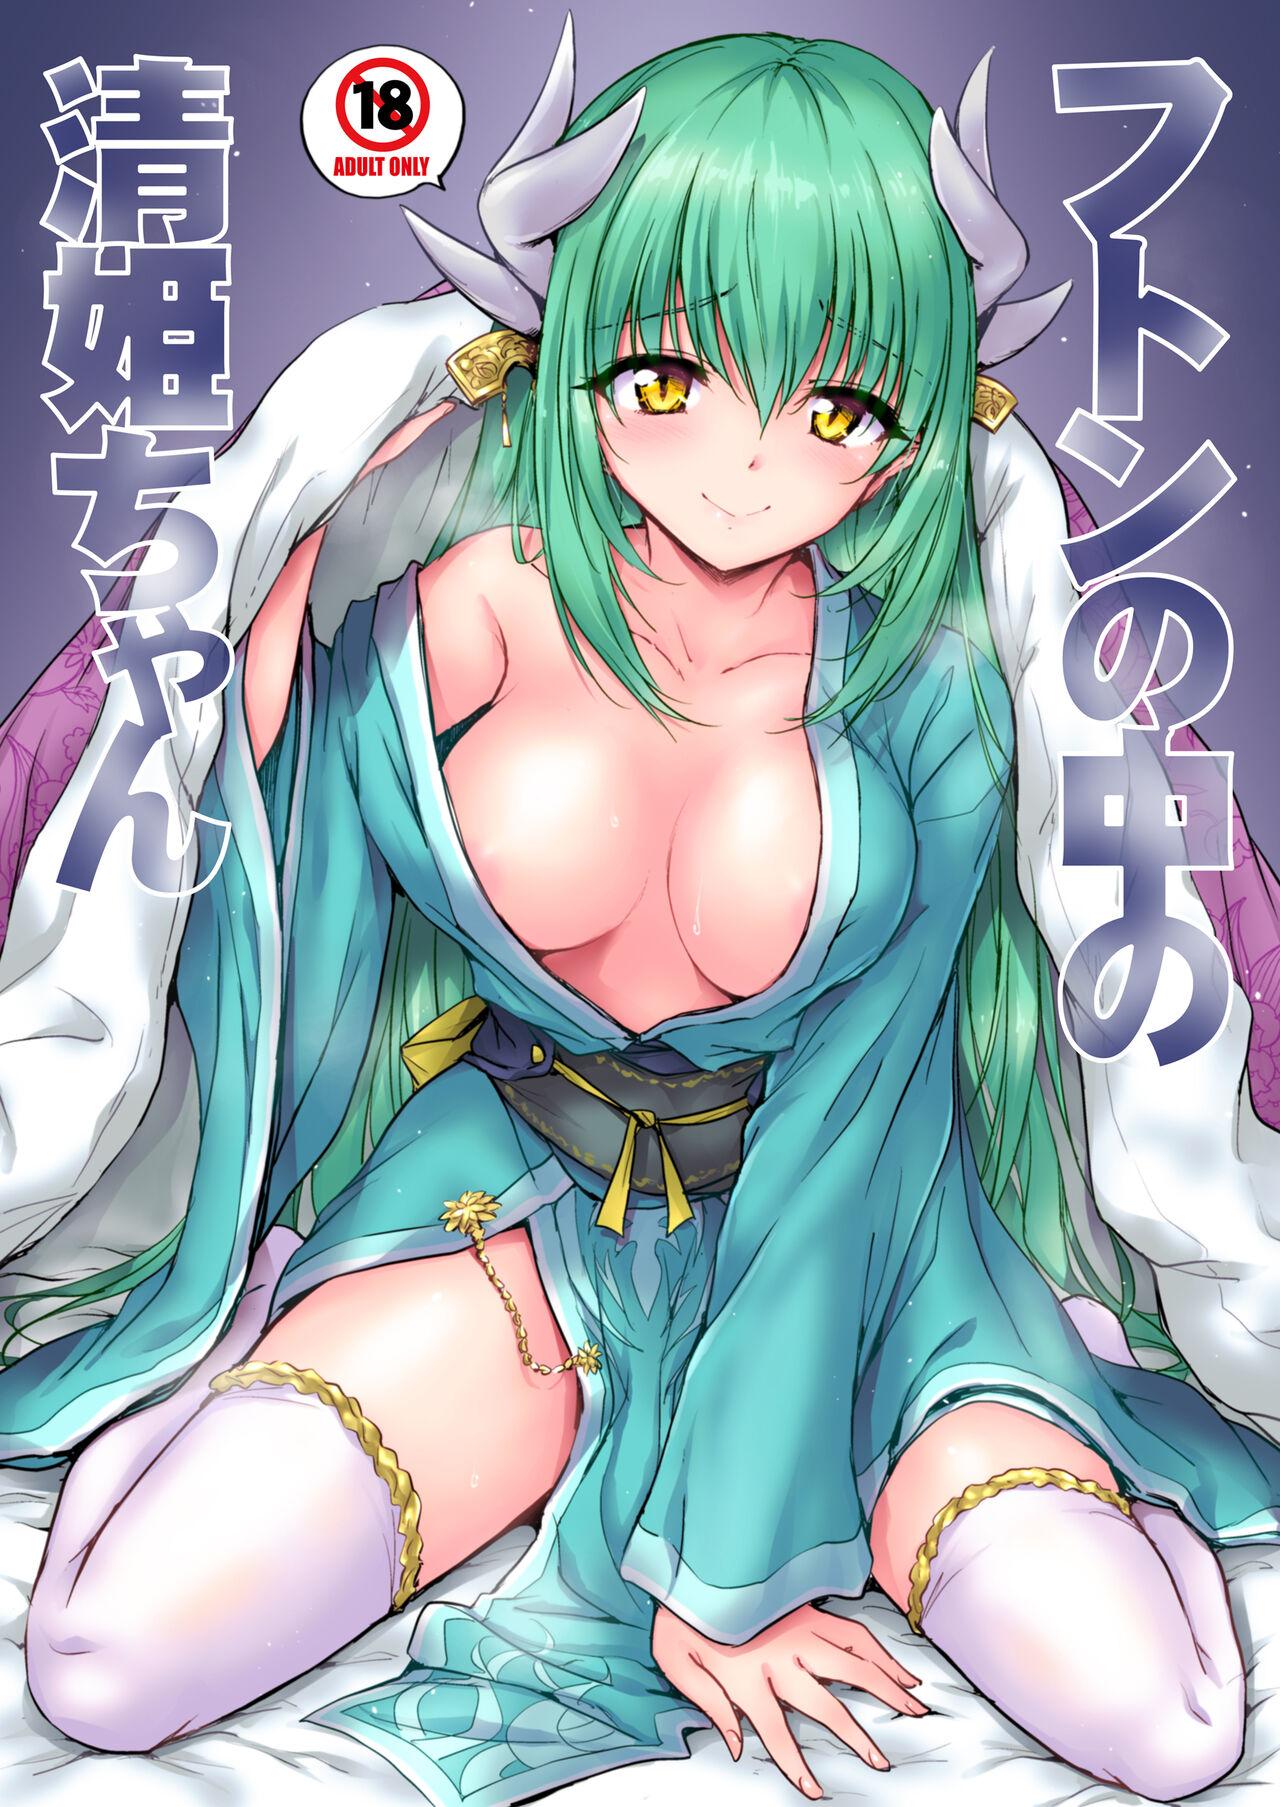 Jerking Off Futon no Naka no Kiyohime-chan - Fate grand order Amatuer - Picture 1